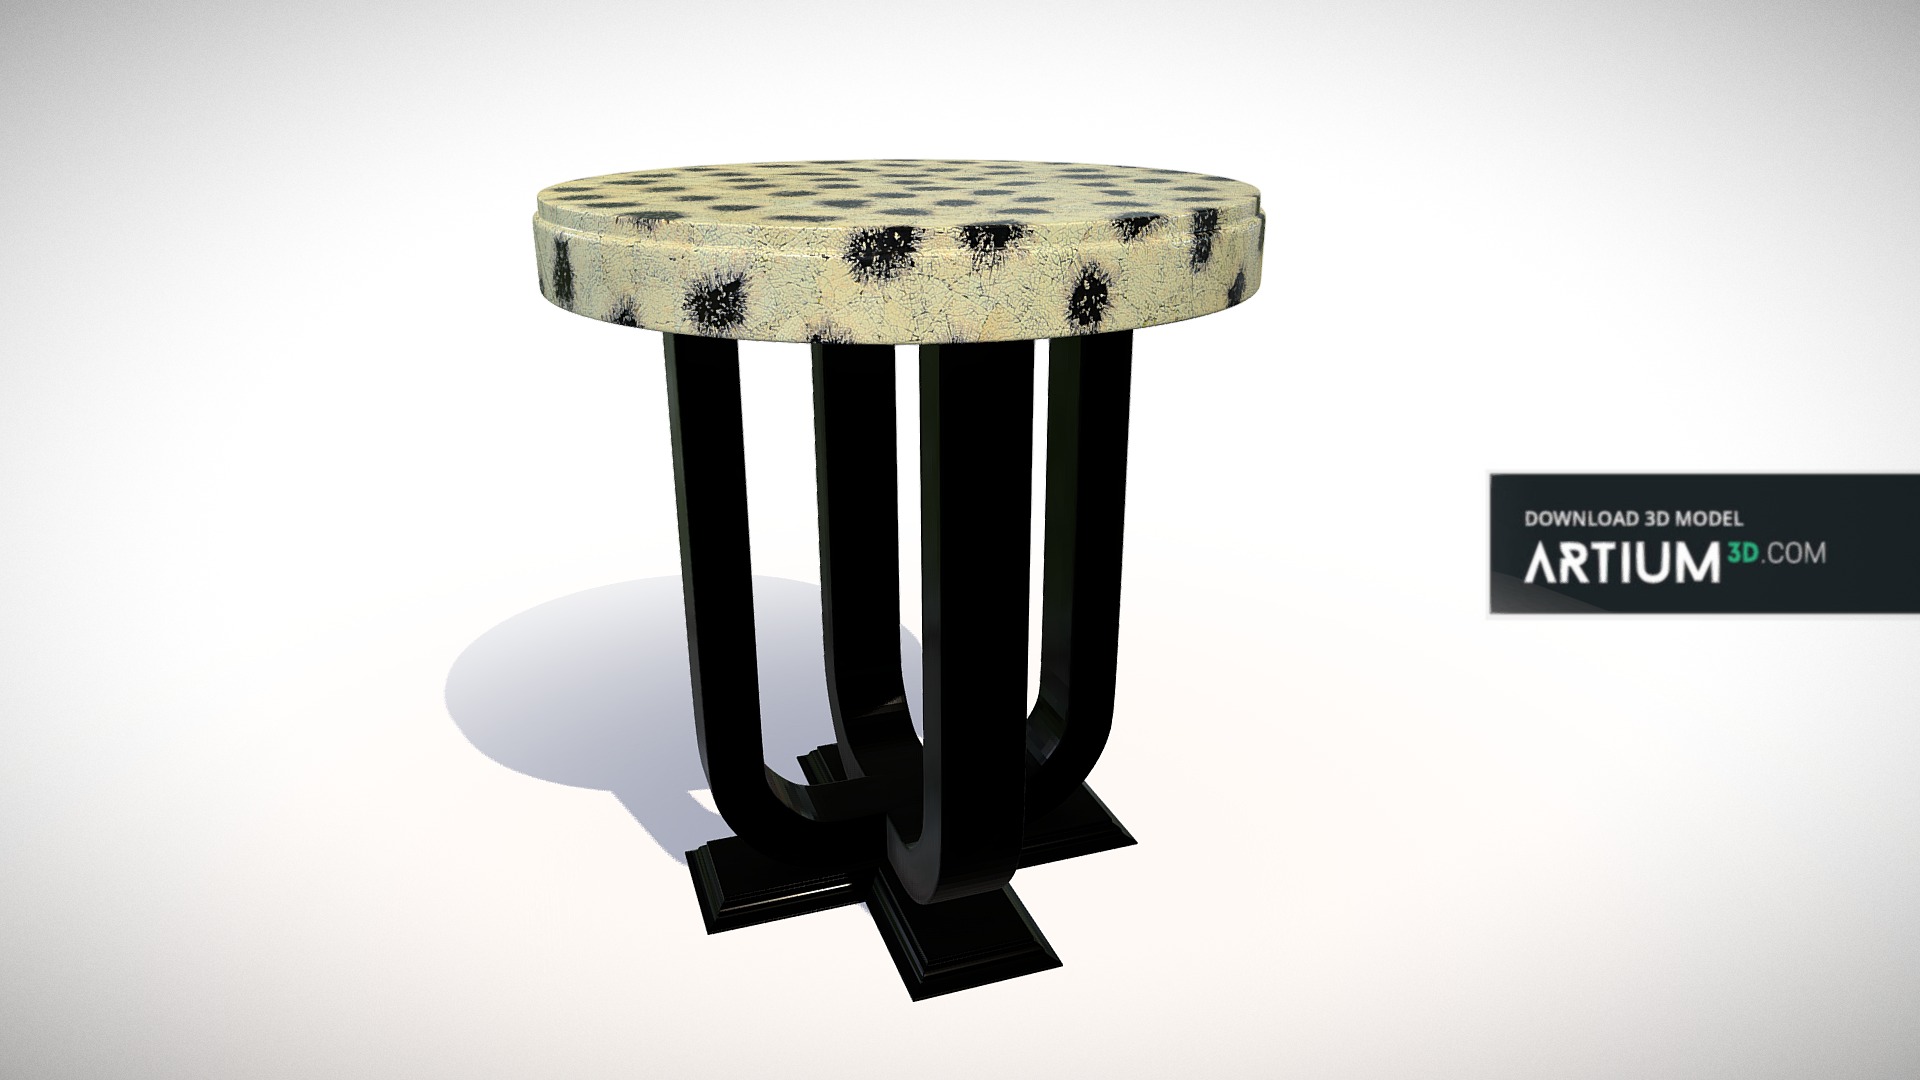 3D model Console table – Art Deco 1920, Jean Dunant style - This is a 3D model of the Console table – Art Deco 1920, Jean Dunant style. The 3D model is about a black and white table.